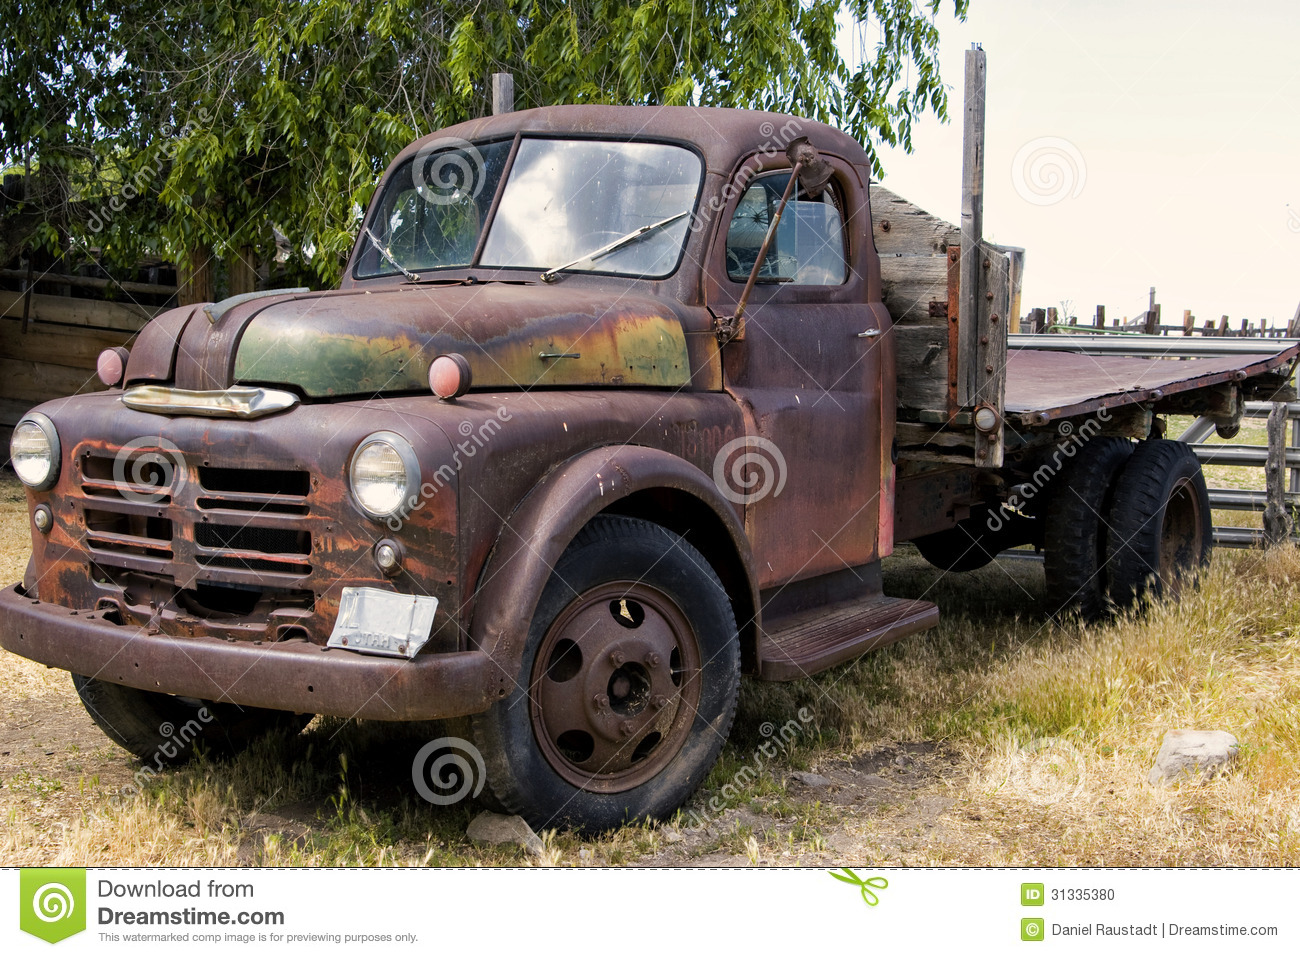 Old Rusty Faded Farm Truck Relic Stock Photo   Image  31335380